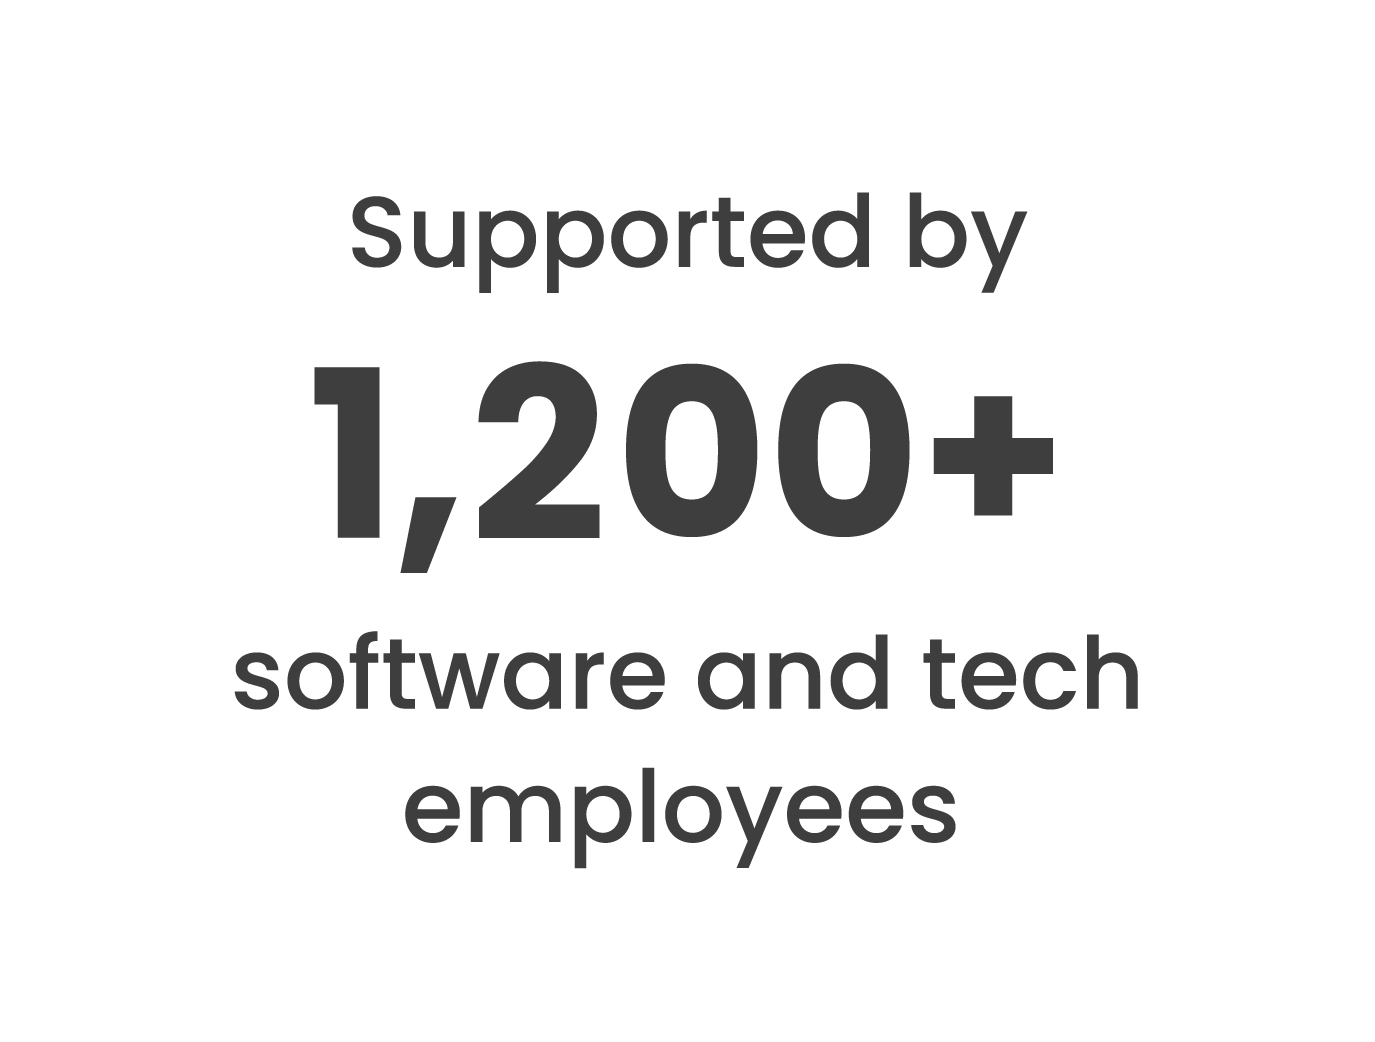 Supported by more than 1,200 software and tech employees